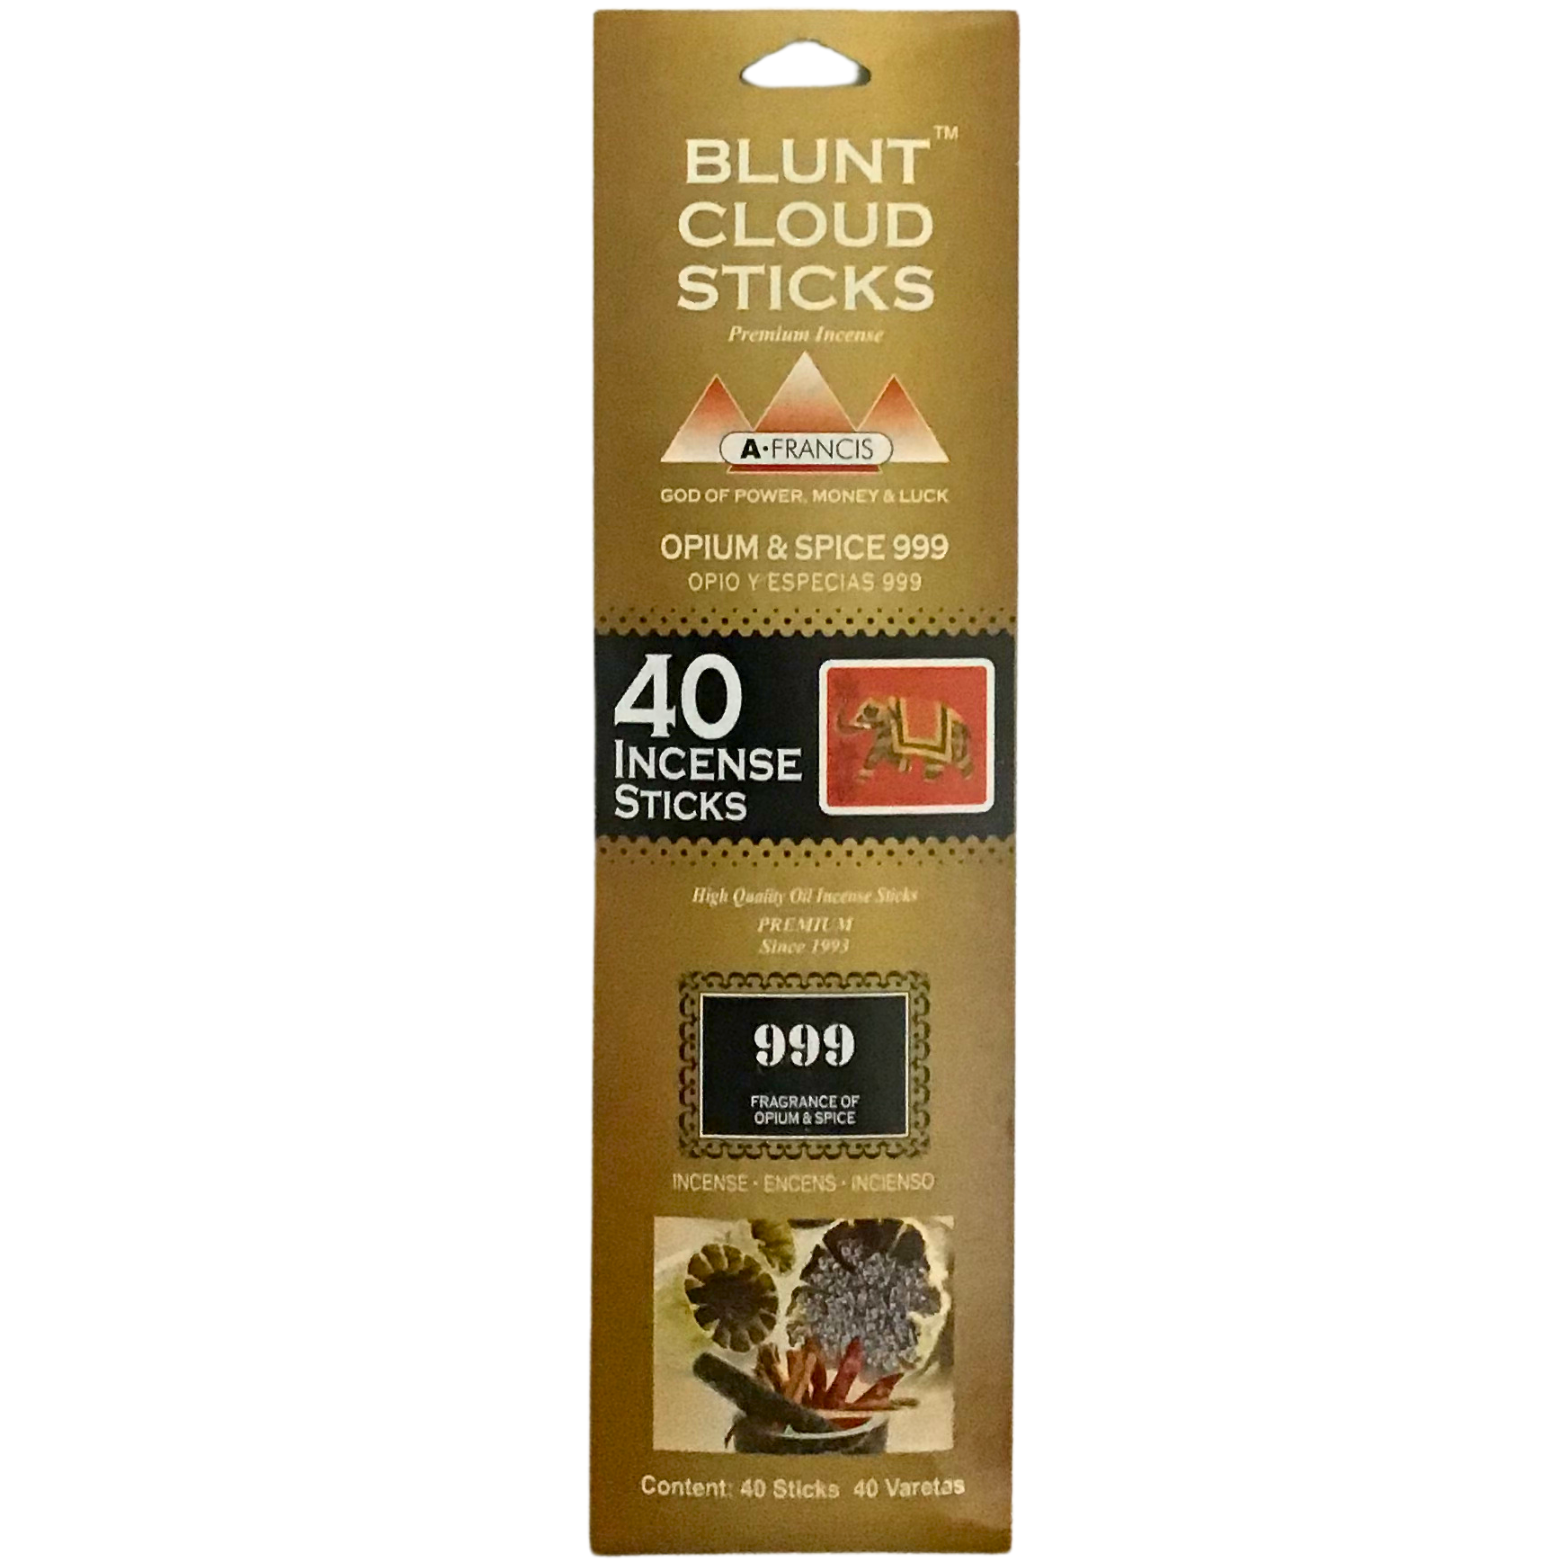 Blunt Cloud Opium and Spice 11 Inch Incense Sticks